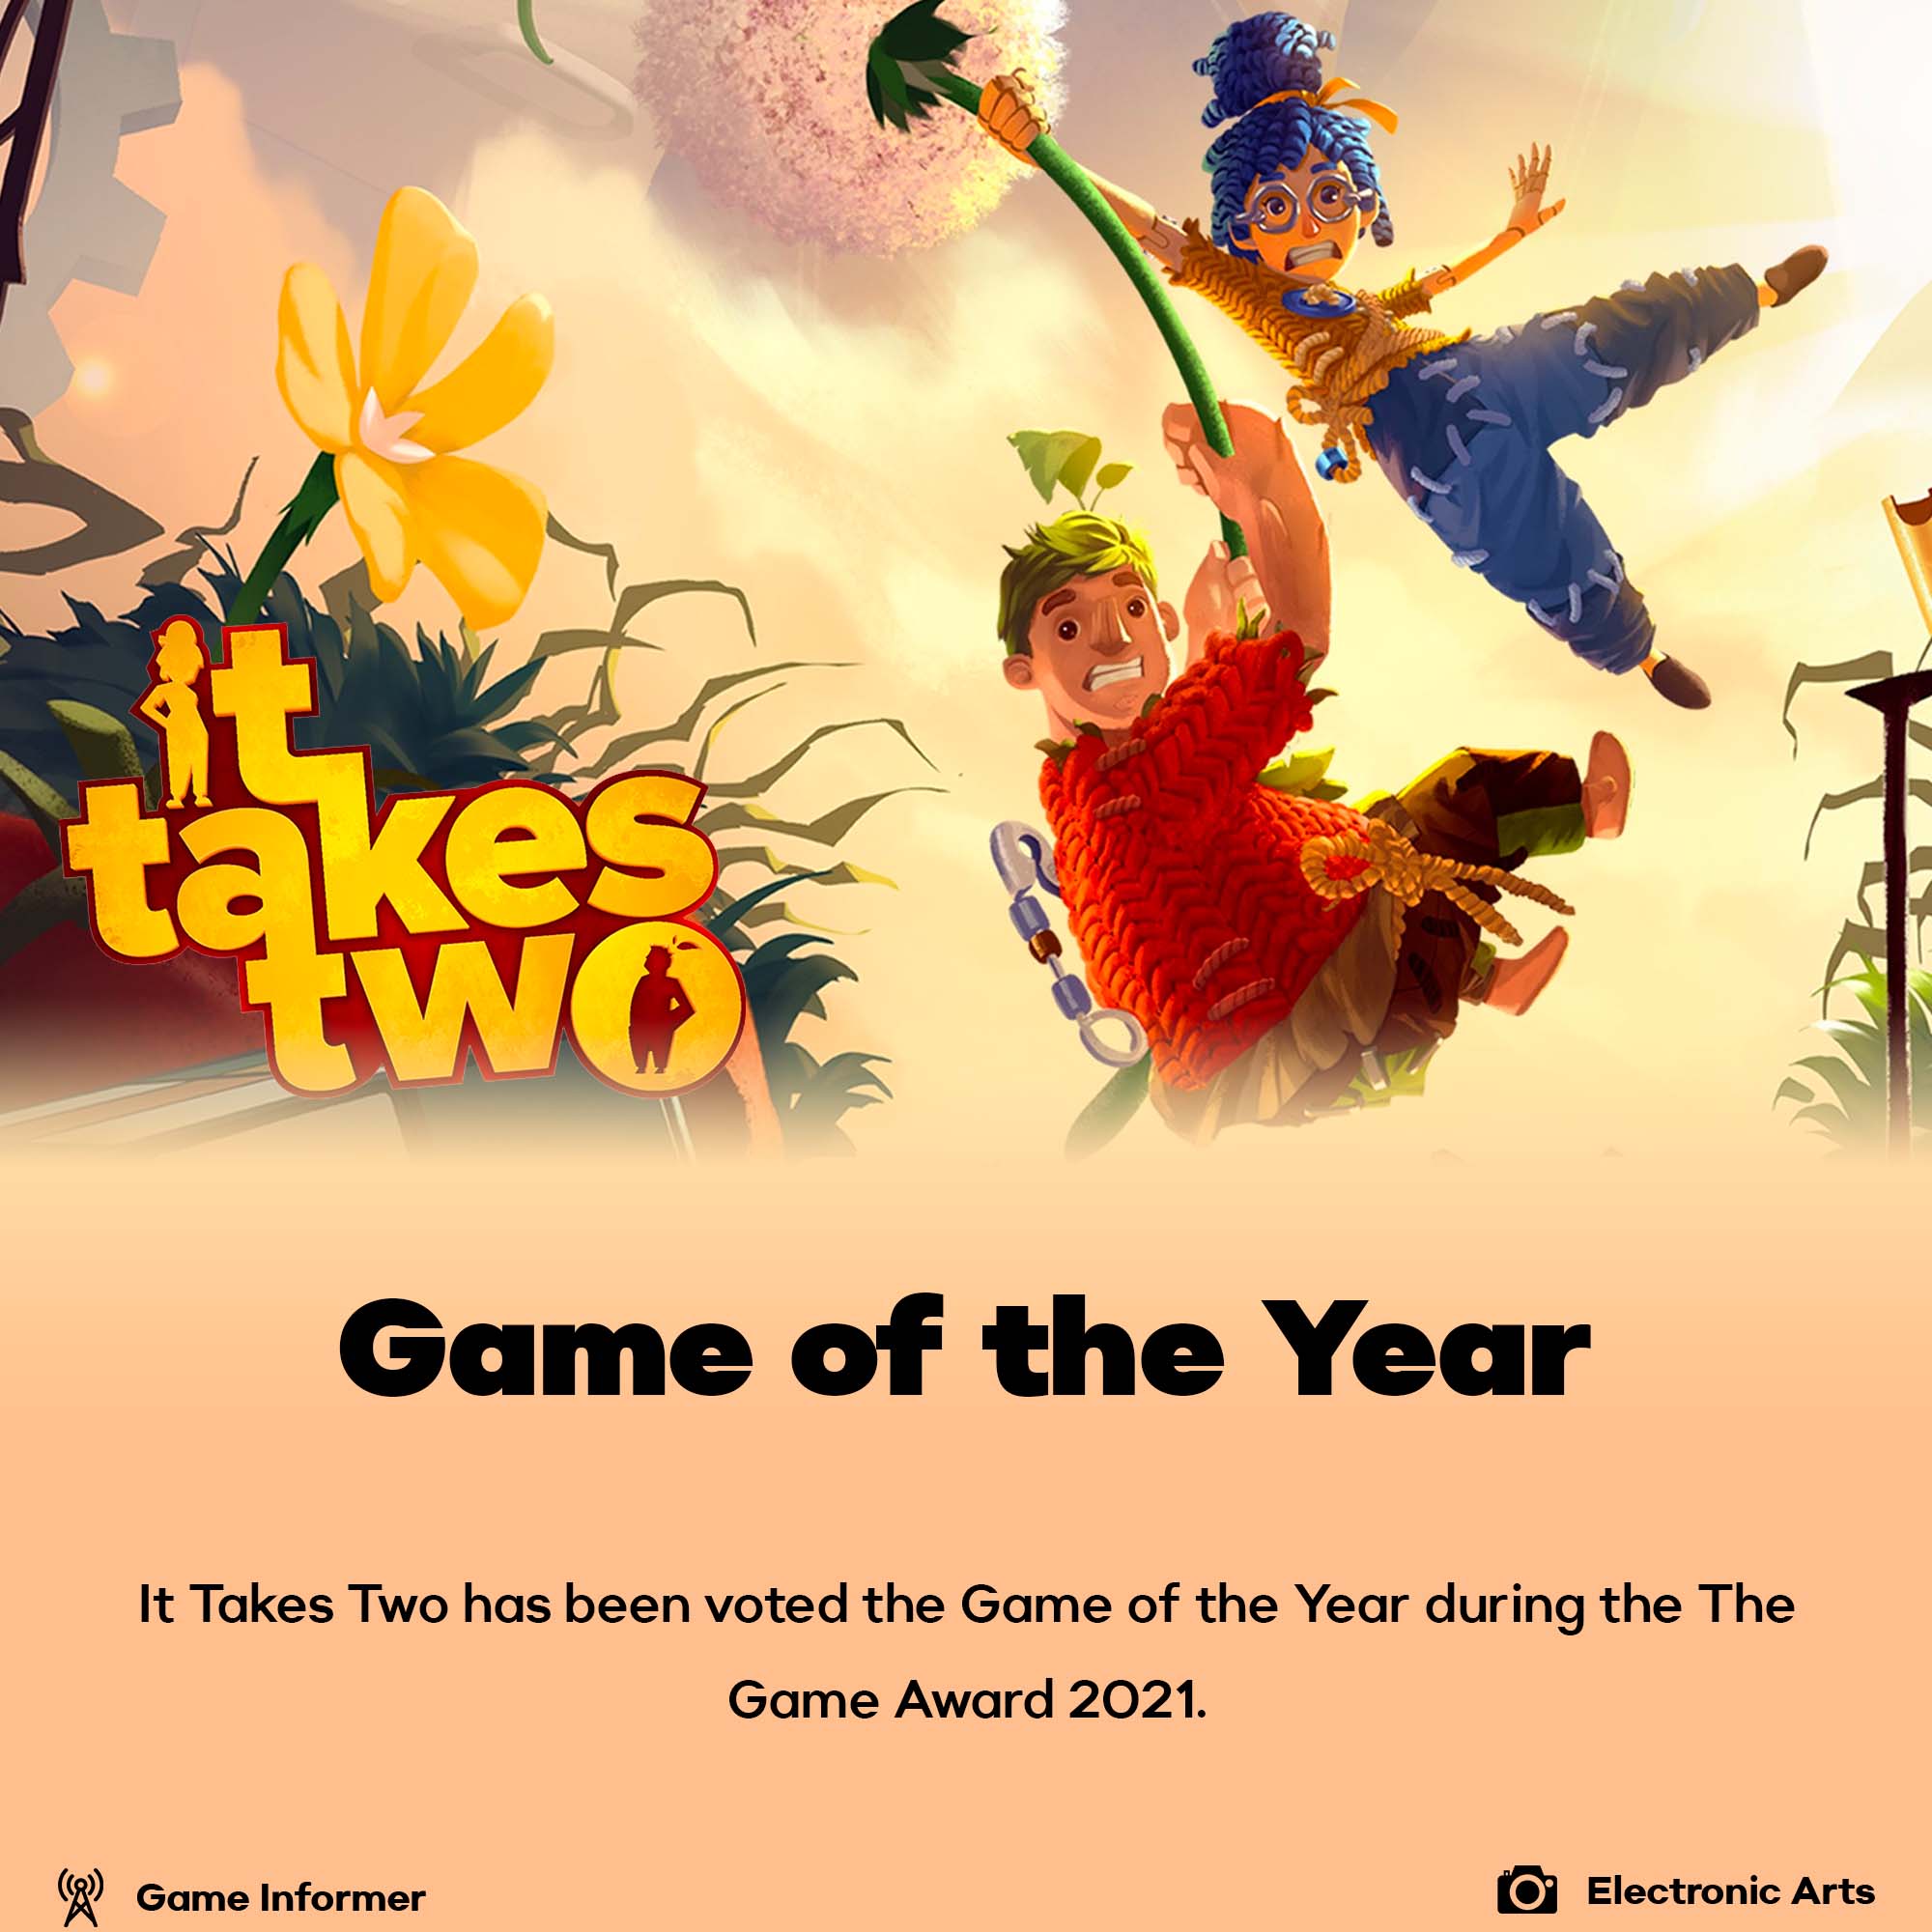 It Takes Two is The Game of the Year